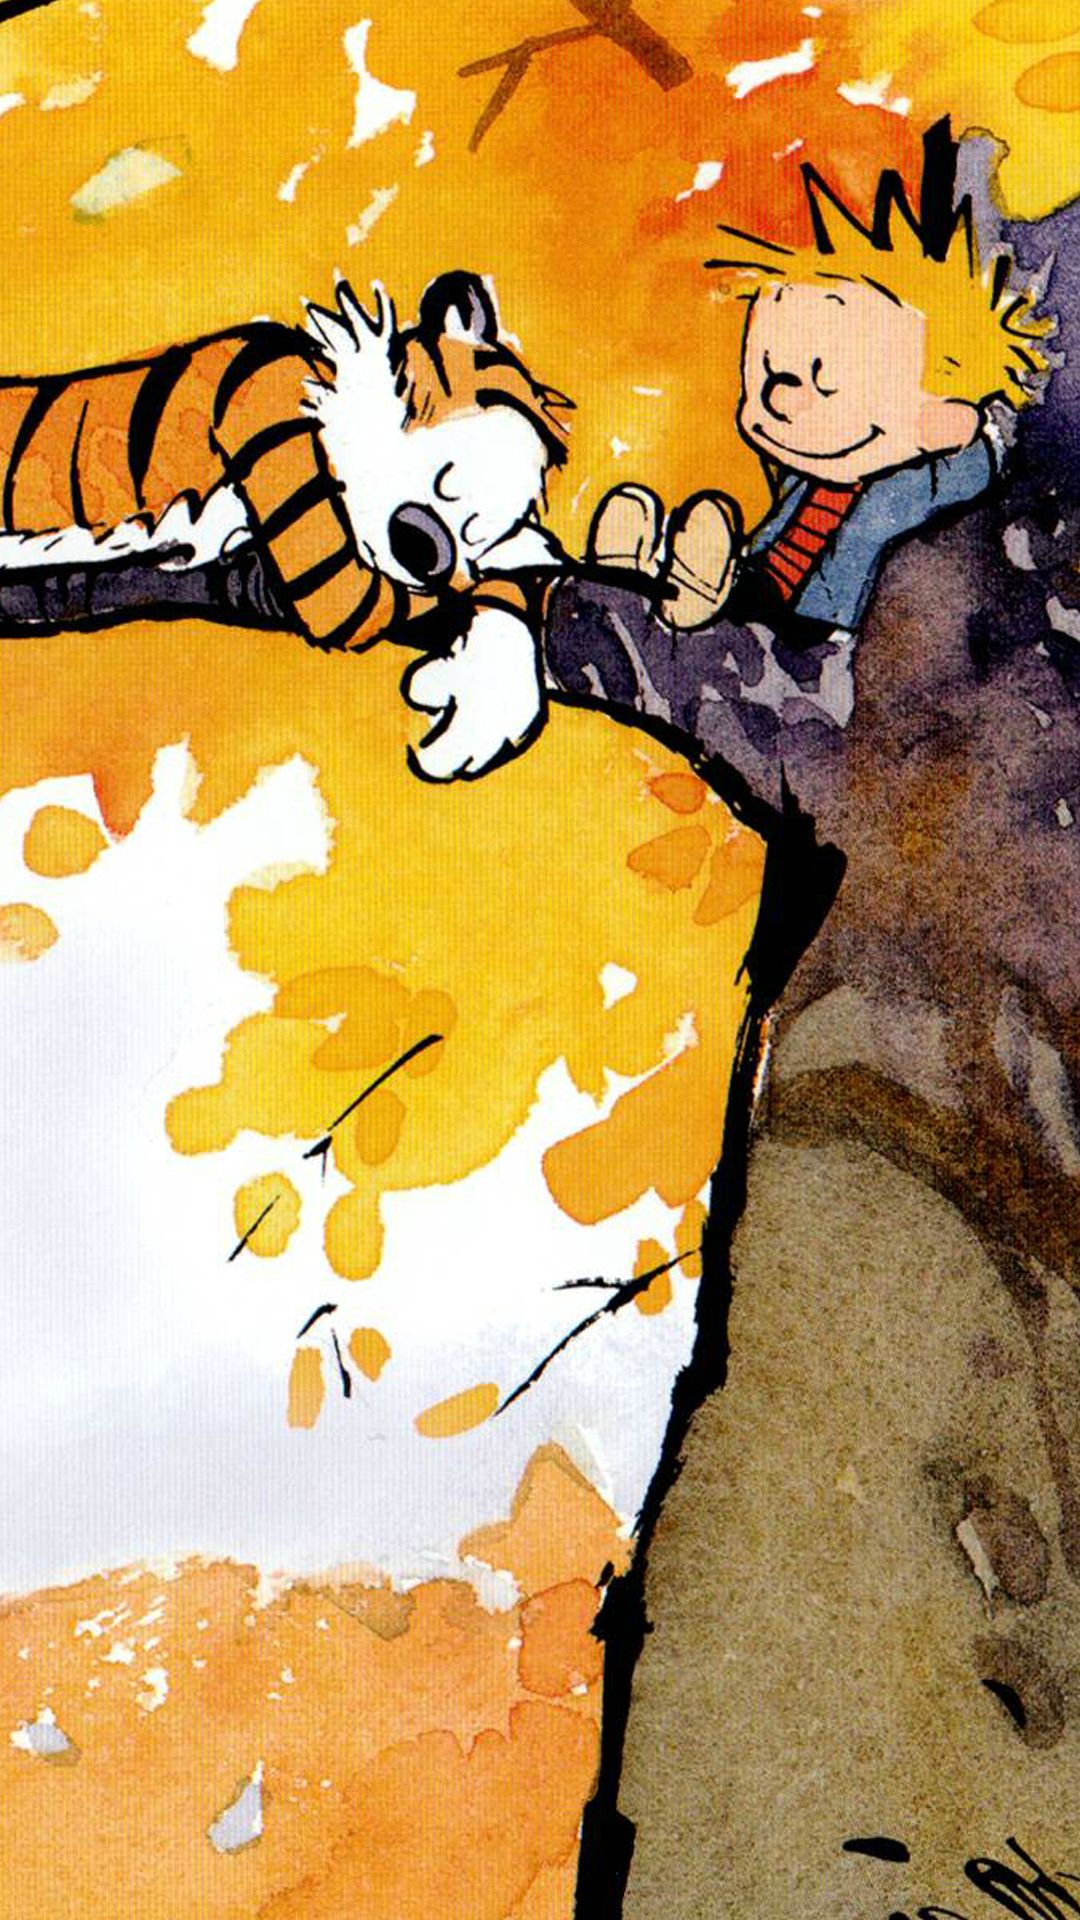 Calvin and Hobbes Wallpaper 1920x1080 72 images